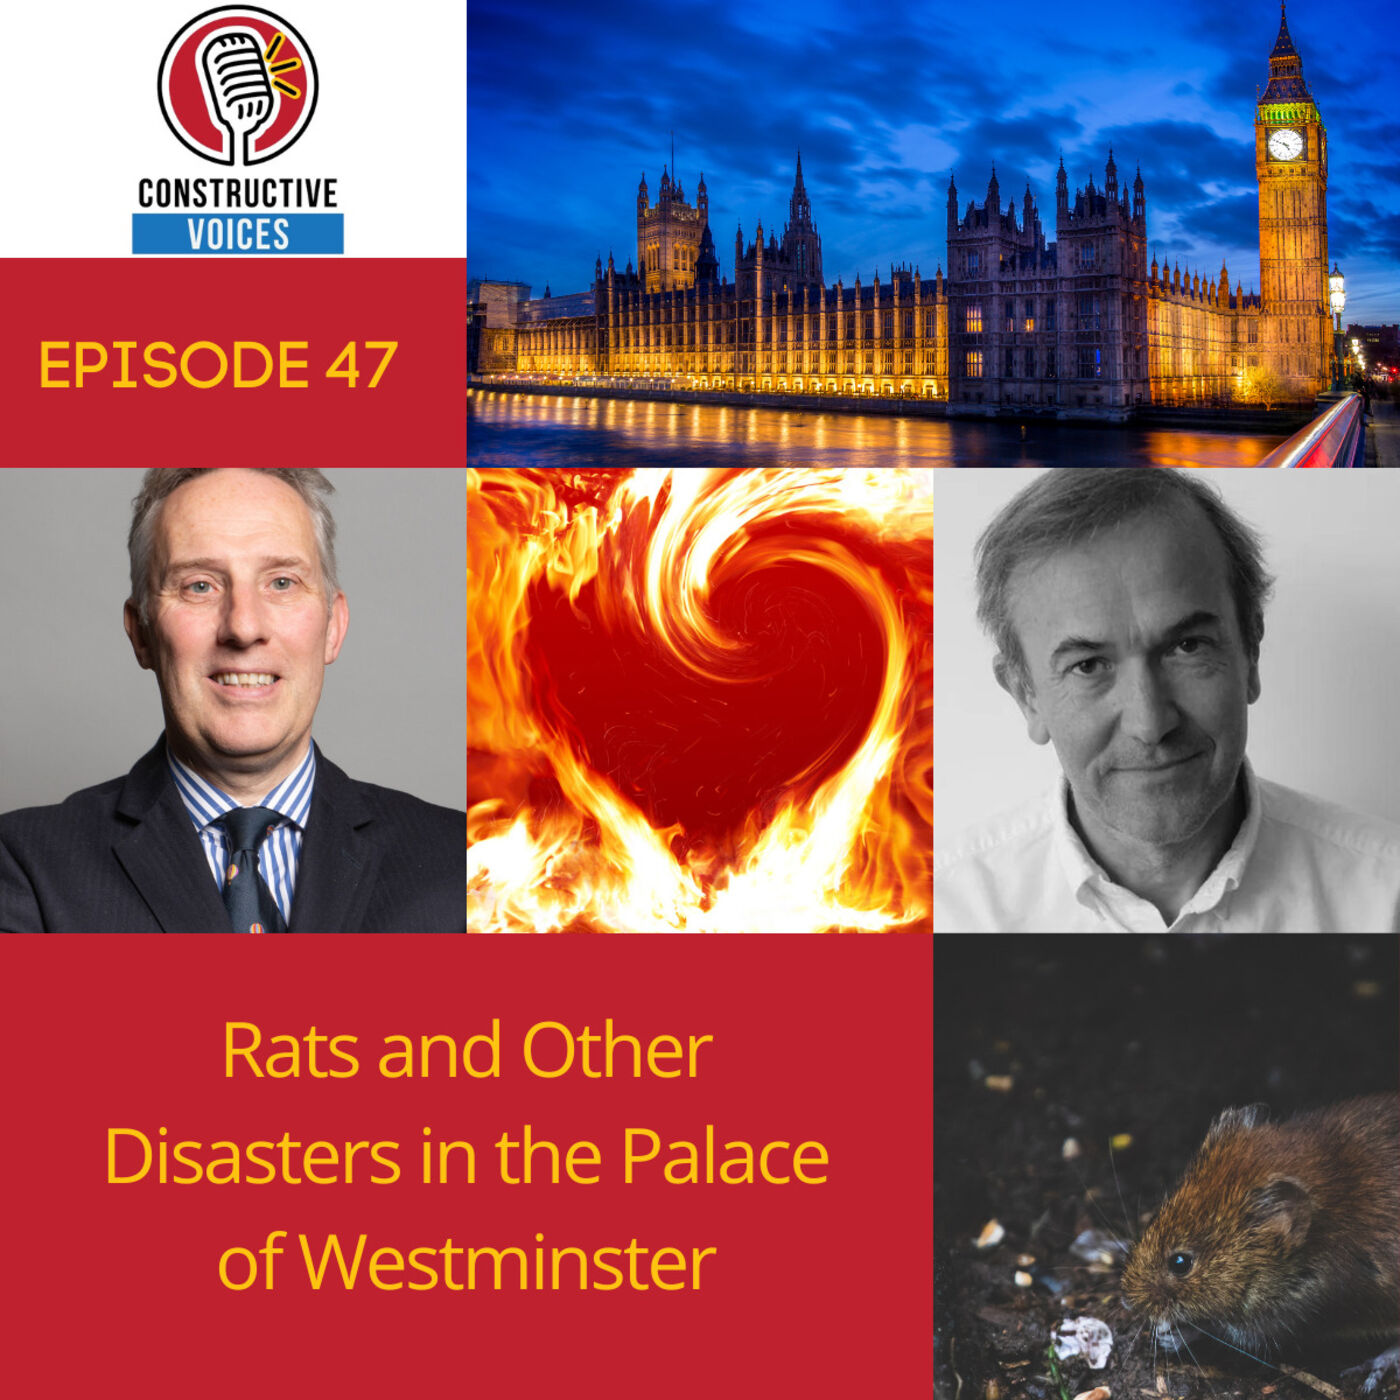 Rats and Other Disasters in the Palace of Westminster